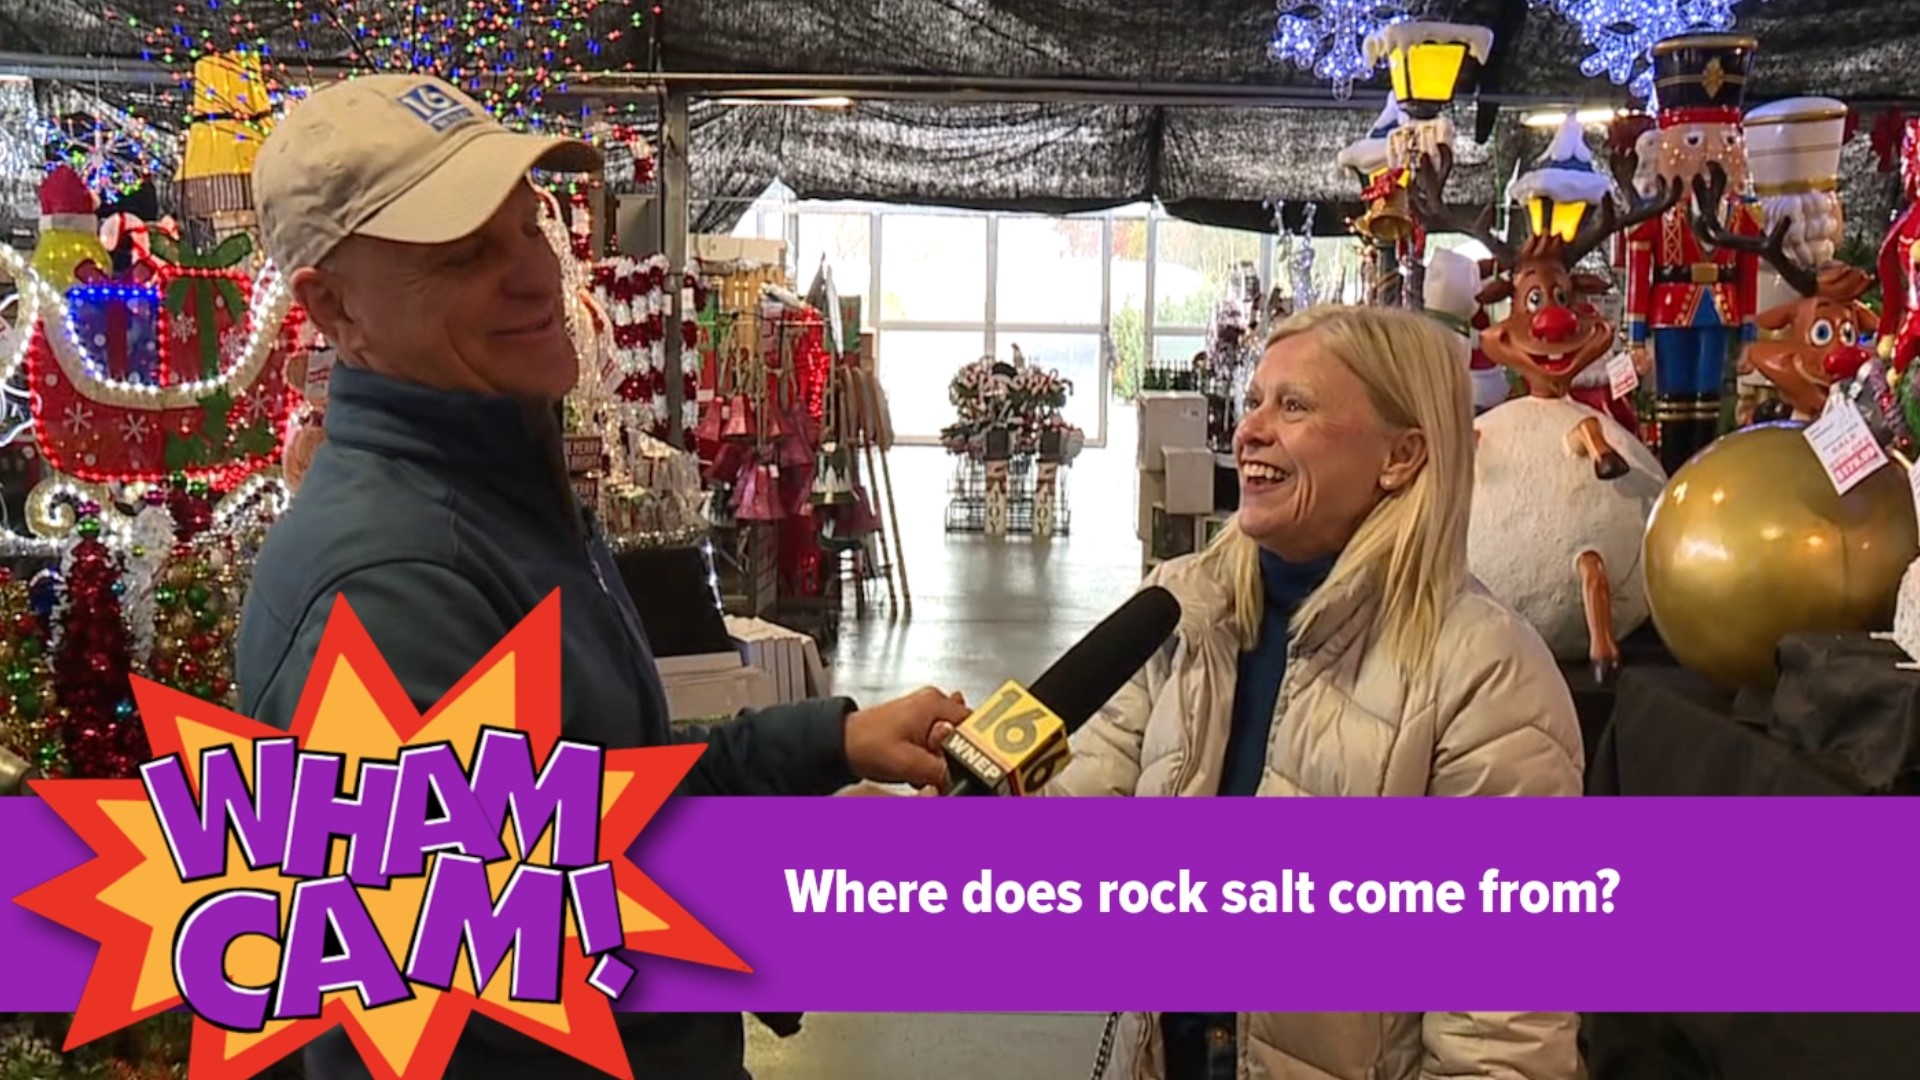 Joe's question, Where does rock salt come from? See where.